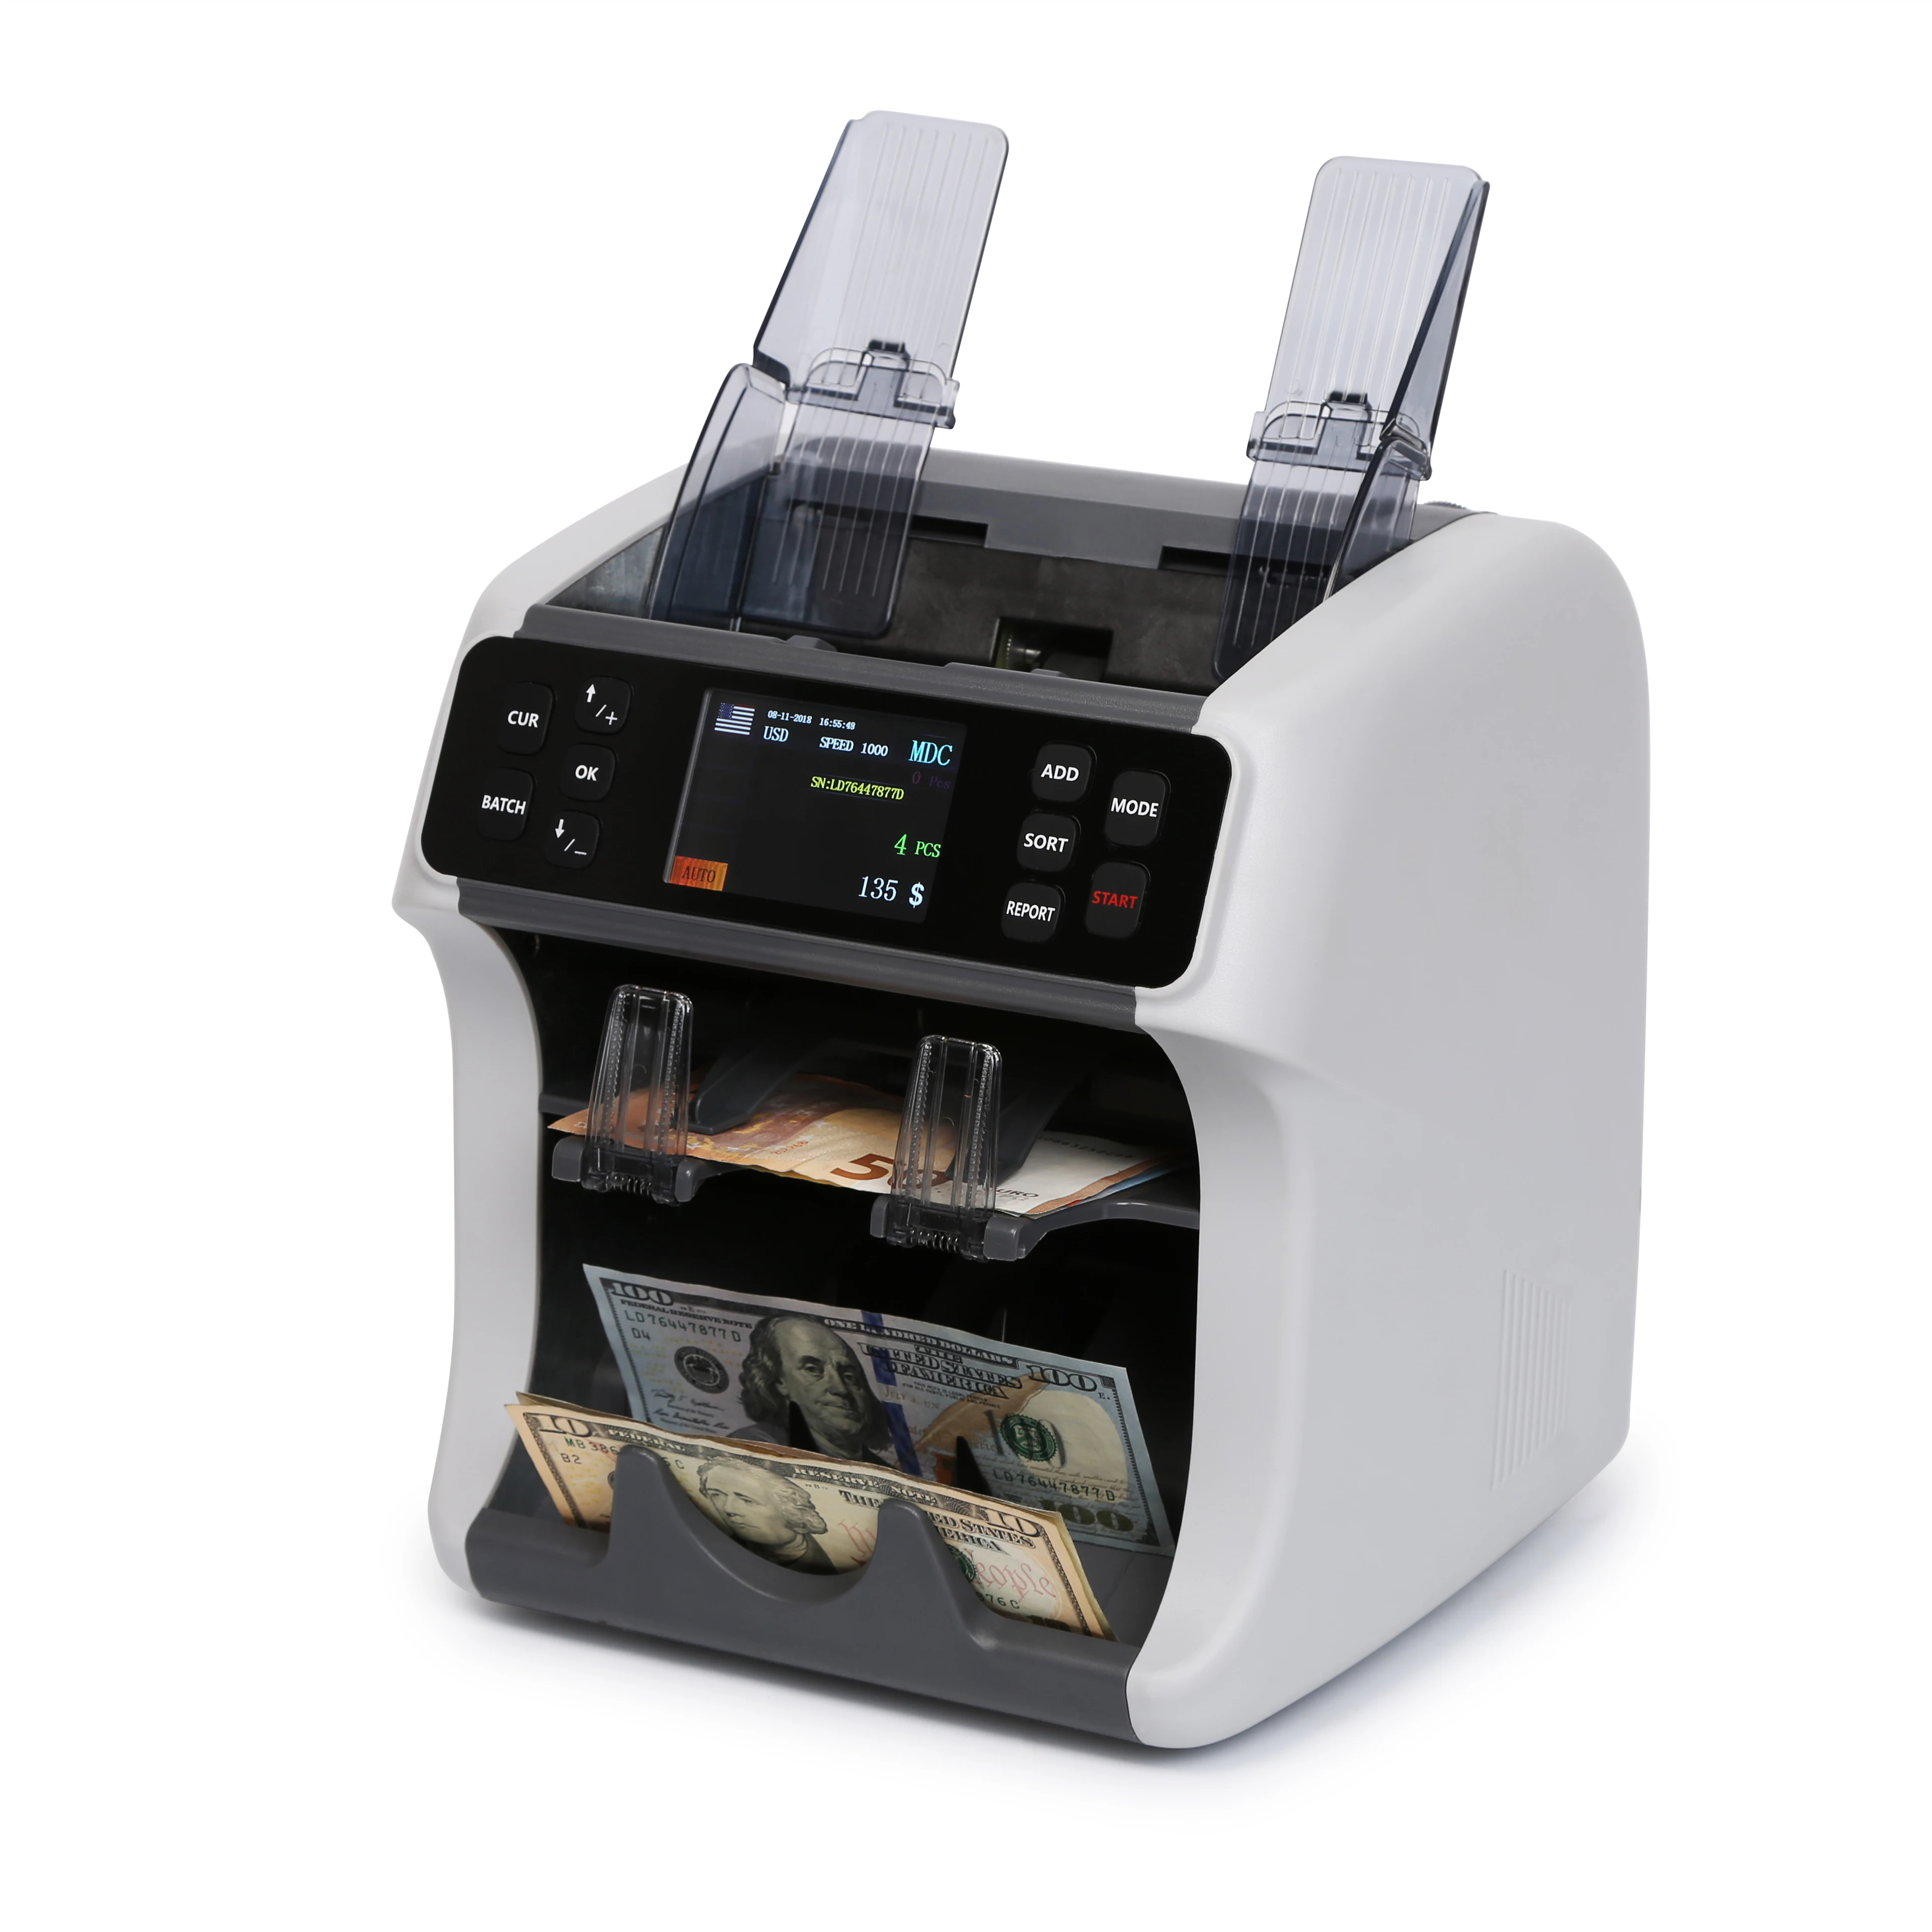 
Financial equipment Two pocket money note Multi Currency mix value counting sorter machine SH-08C 